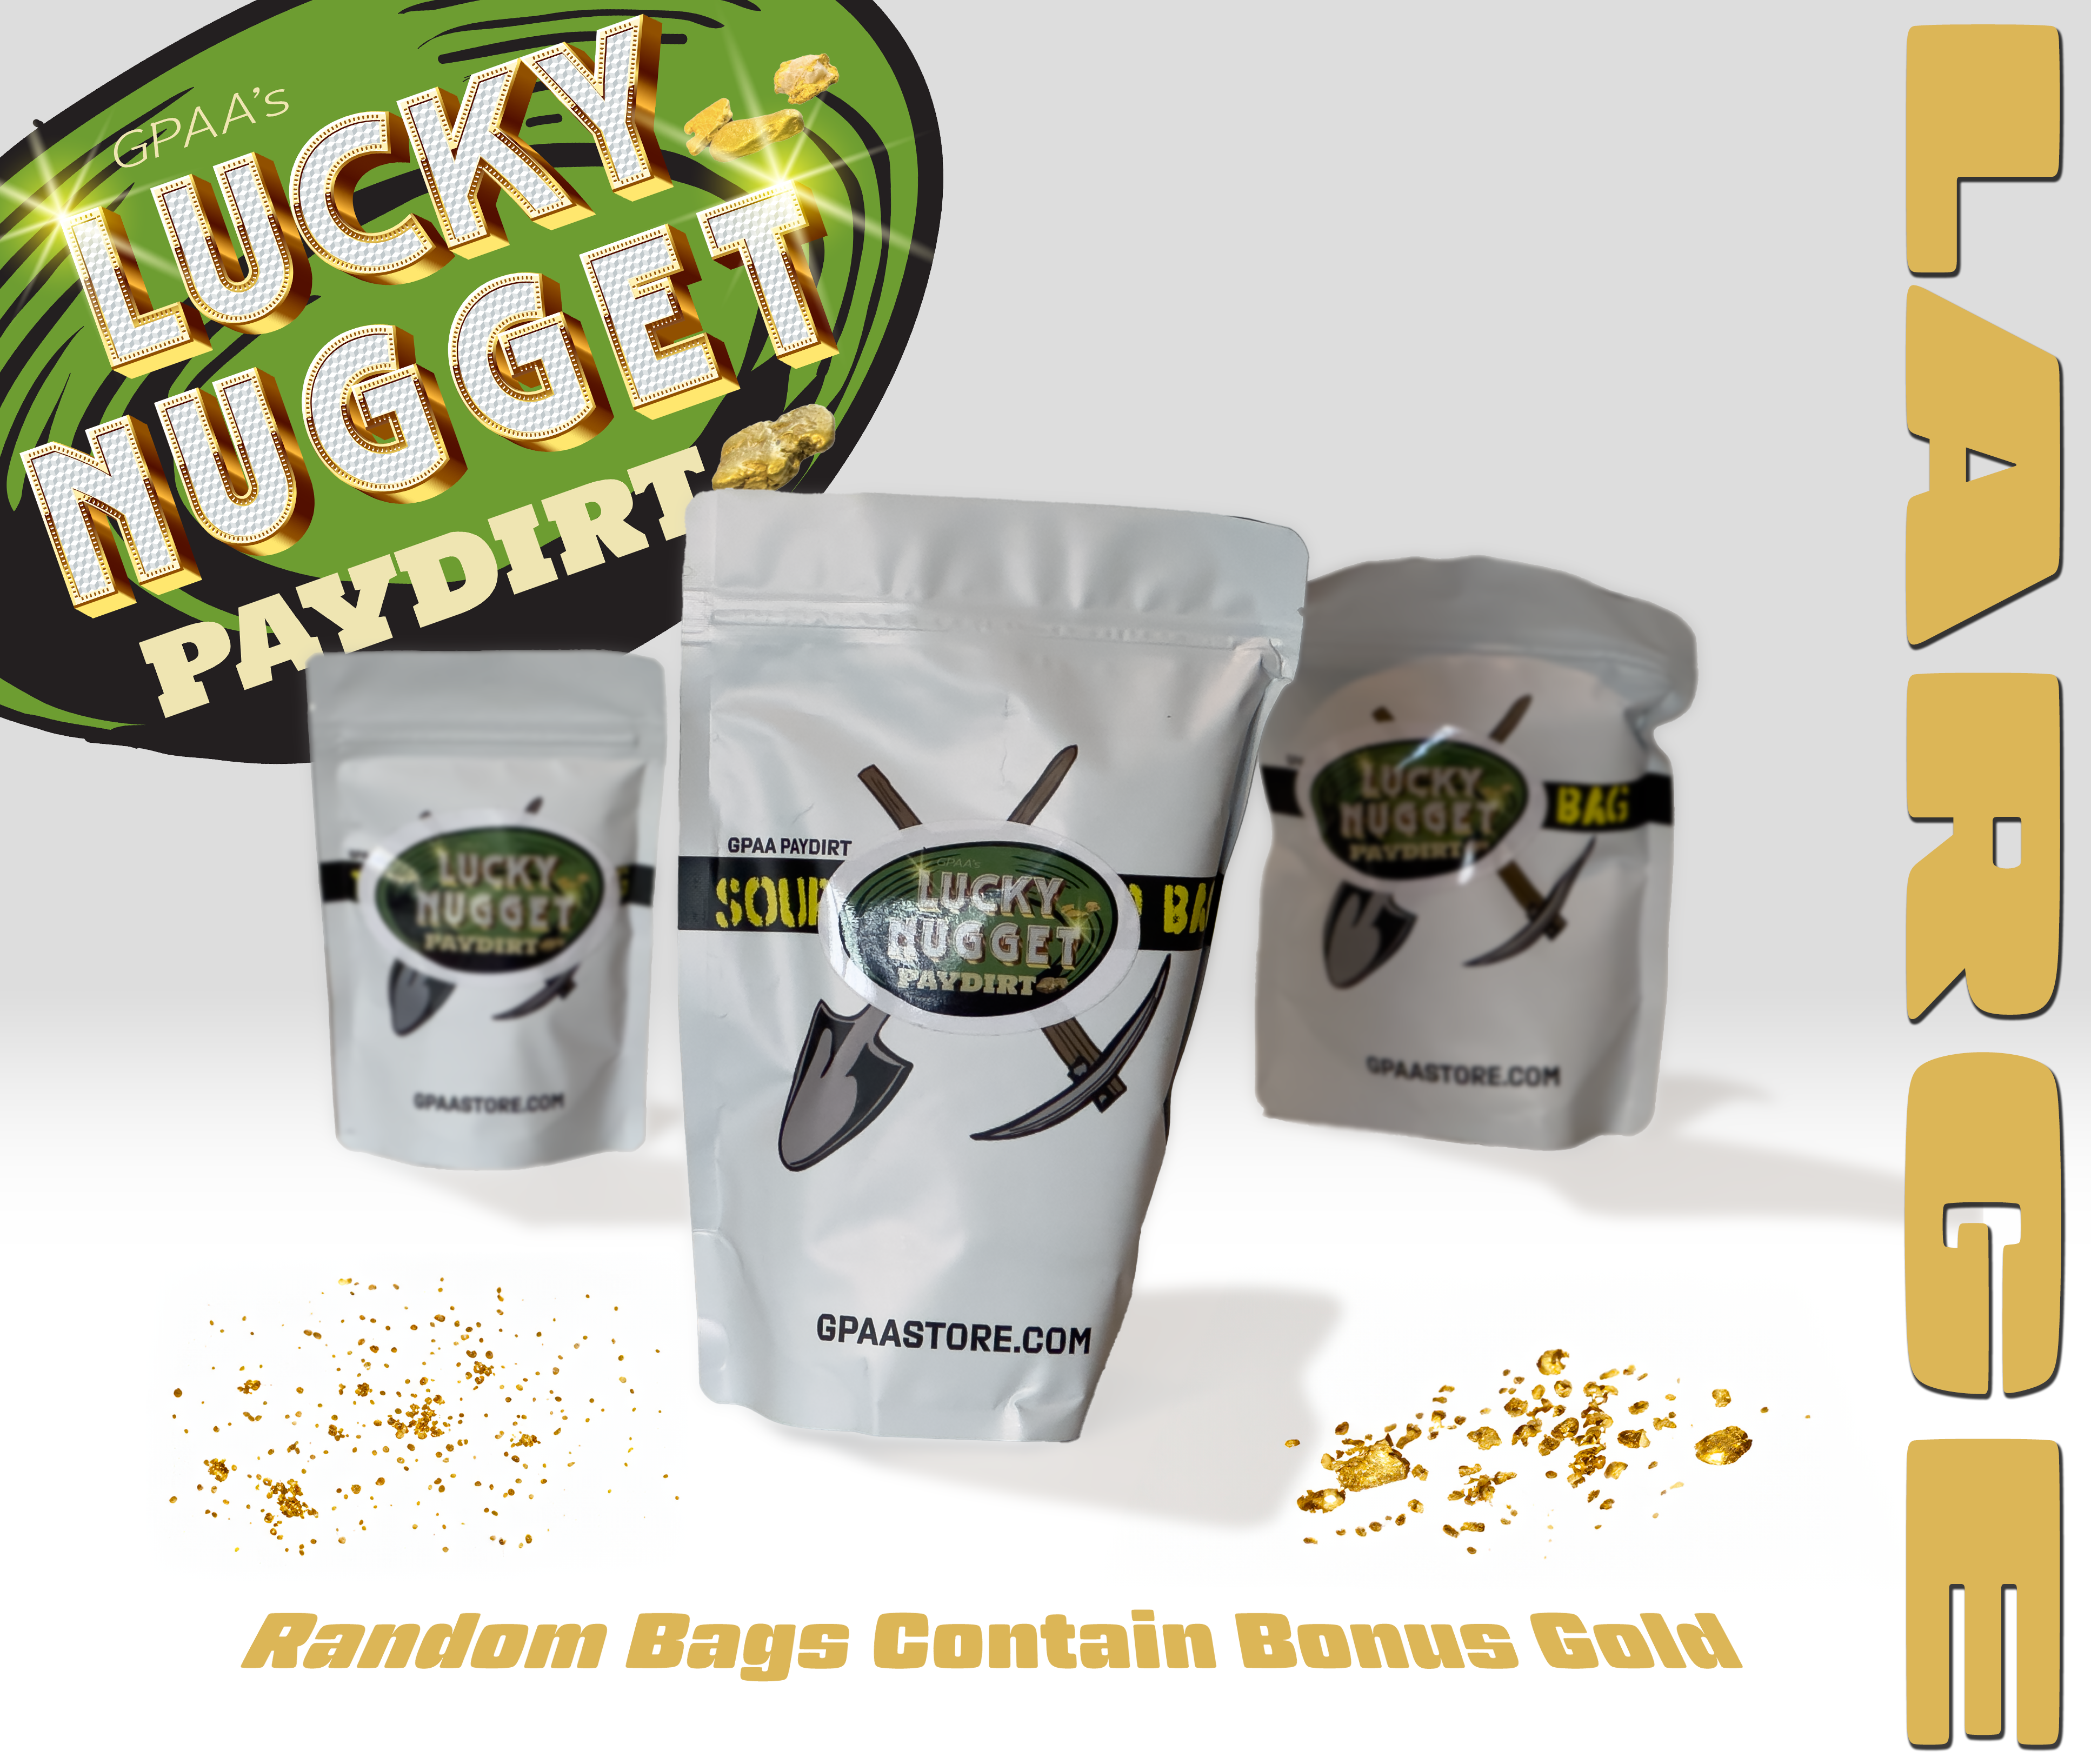  Goldn Gold Paydirt Victory Panning Pay Dirt Bag – Gold  Prospecting Concentrate : Patio, Lawn & Garden